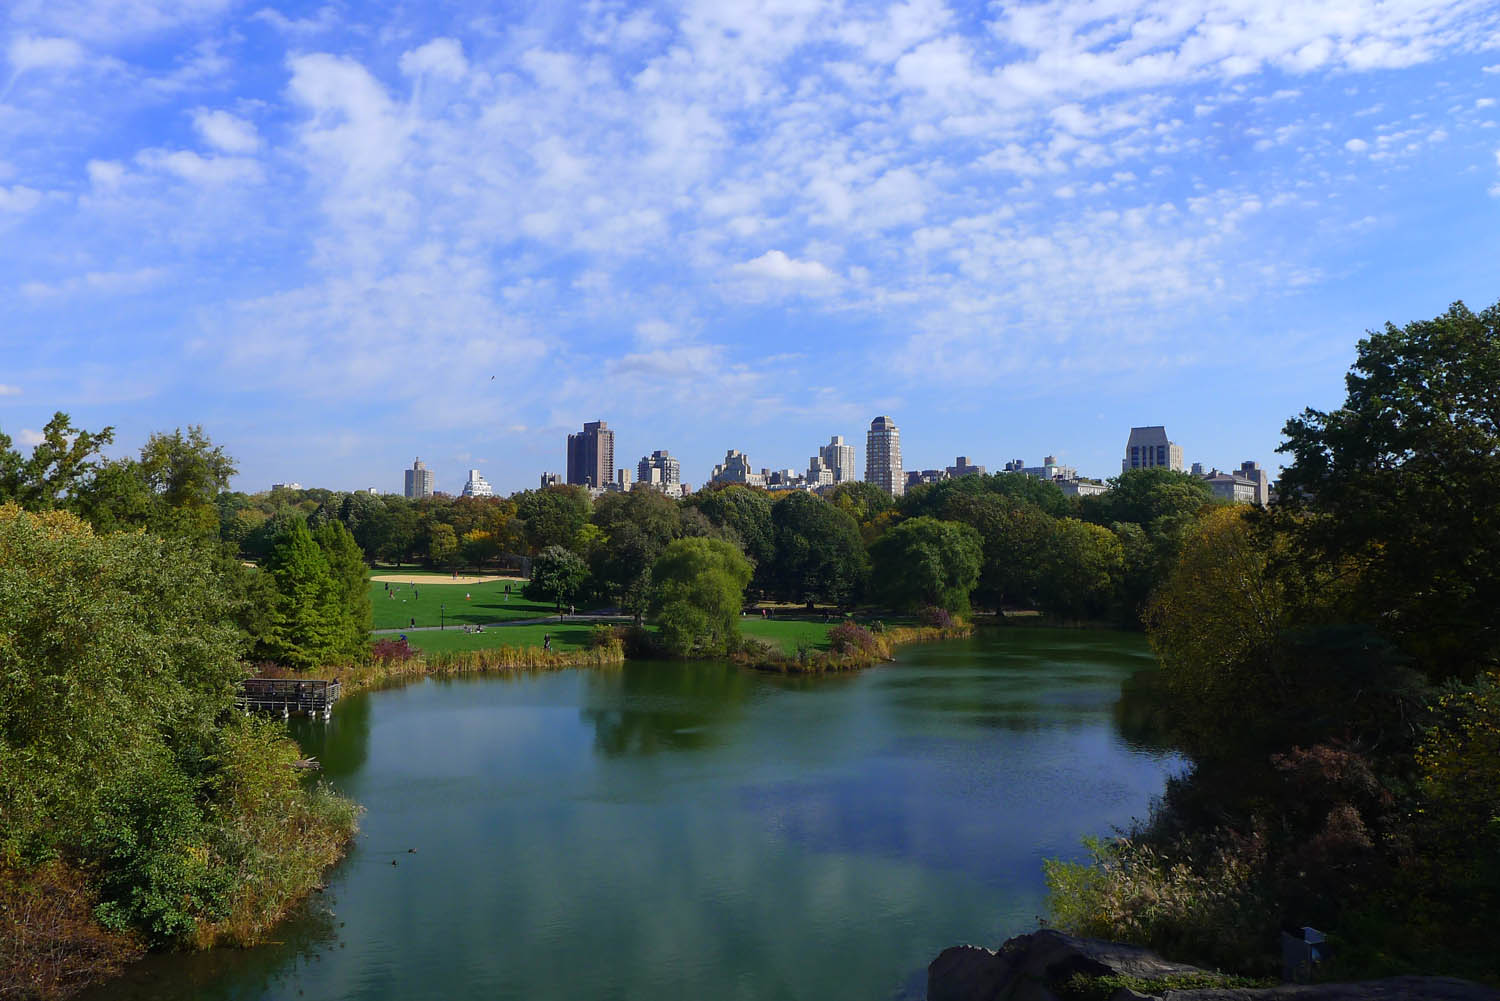 …visited Central Park’s castle | Today's the Day I